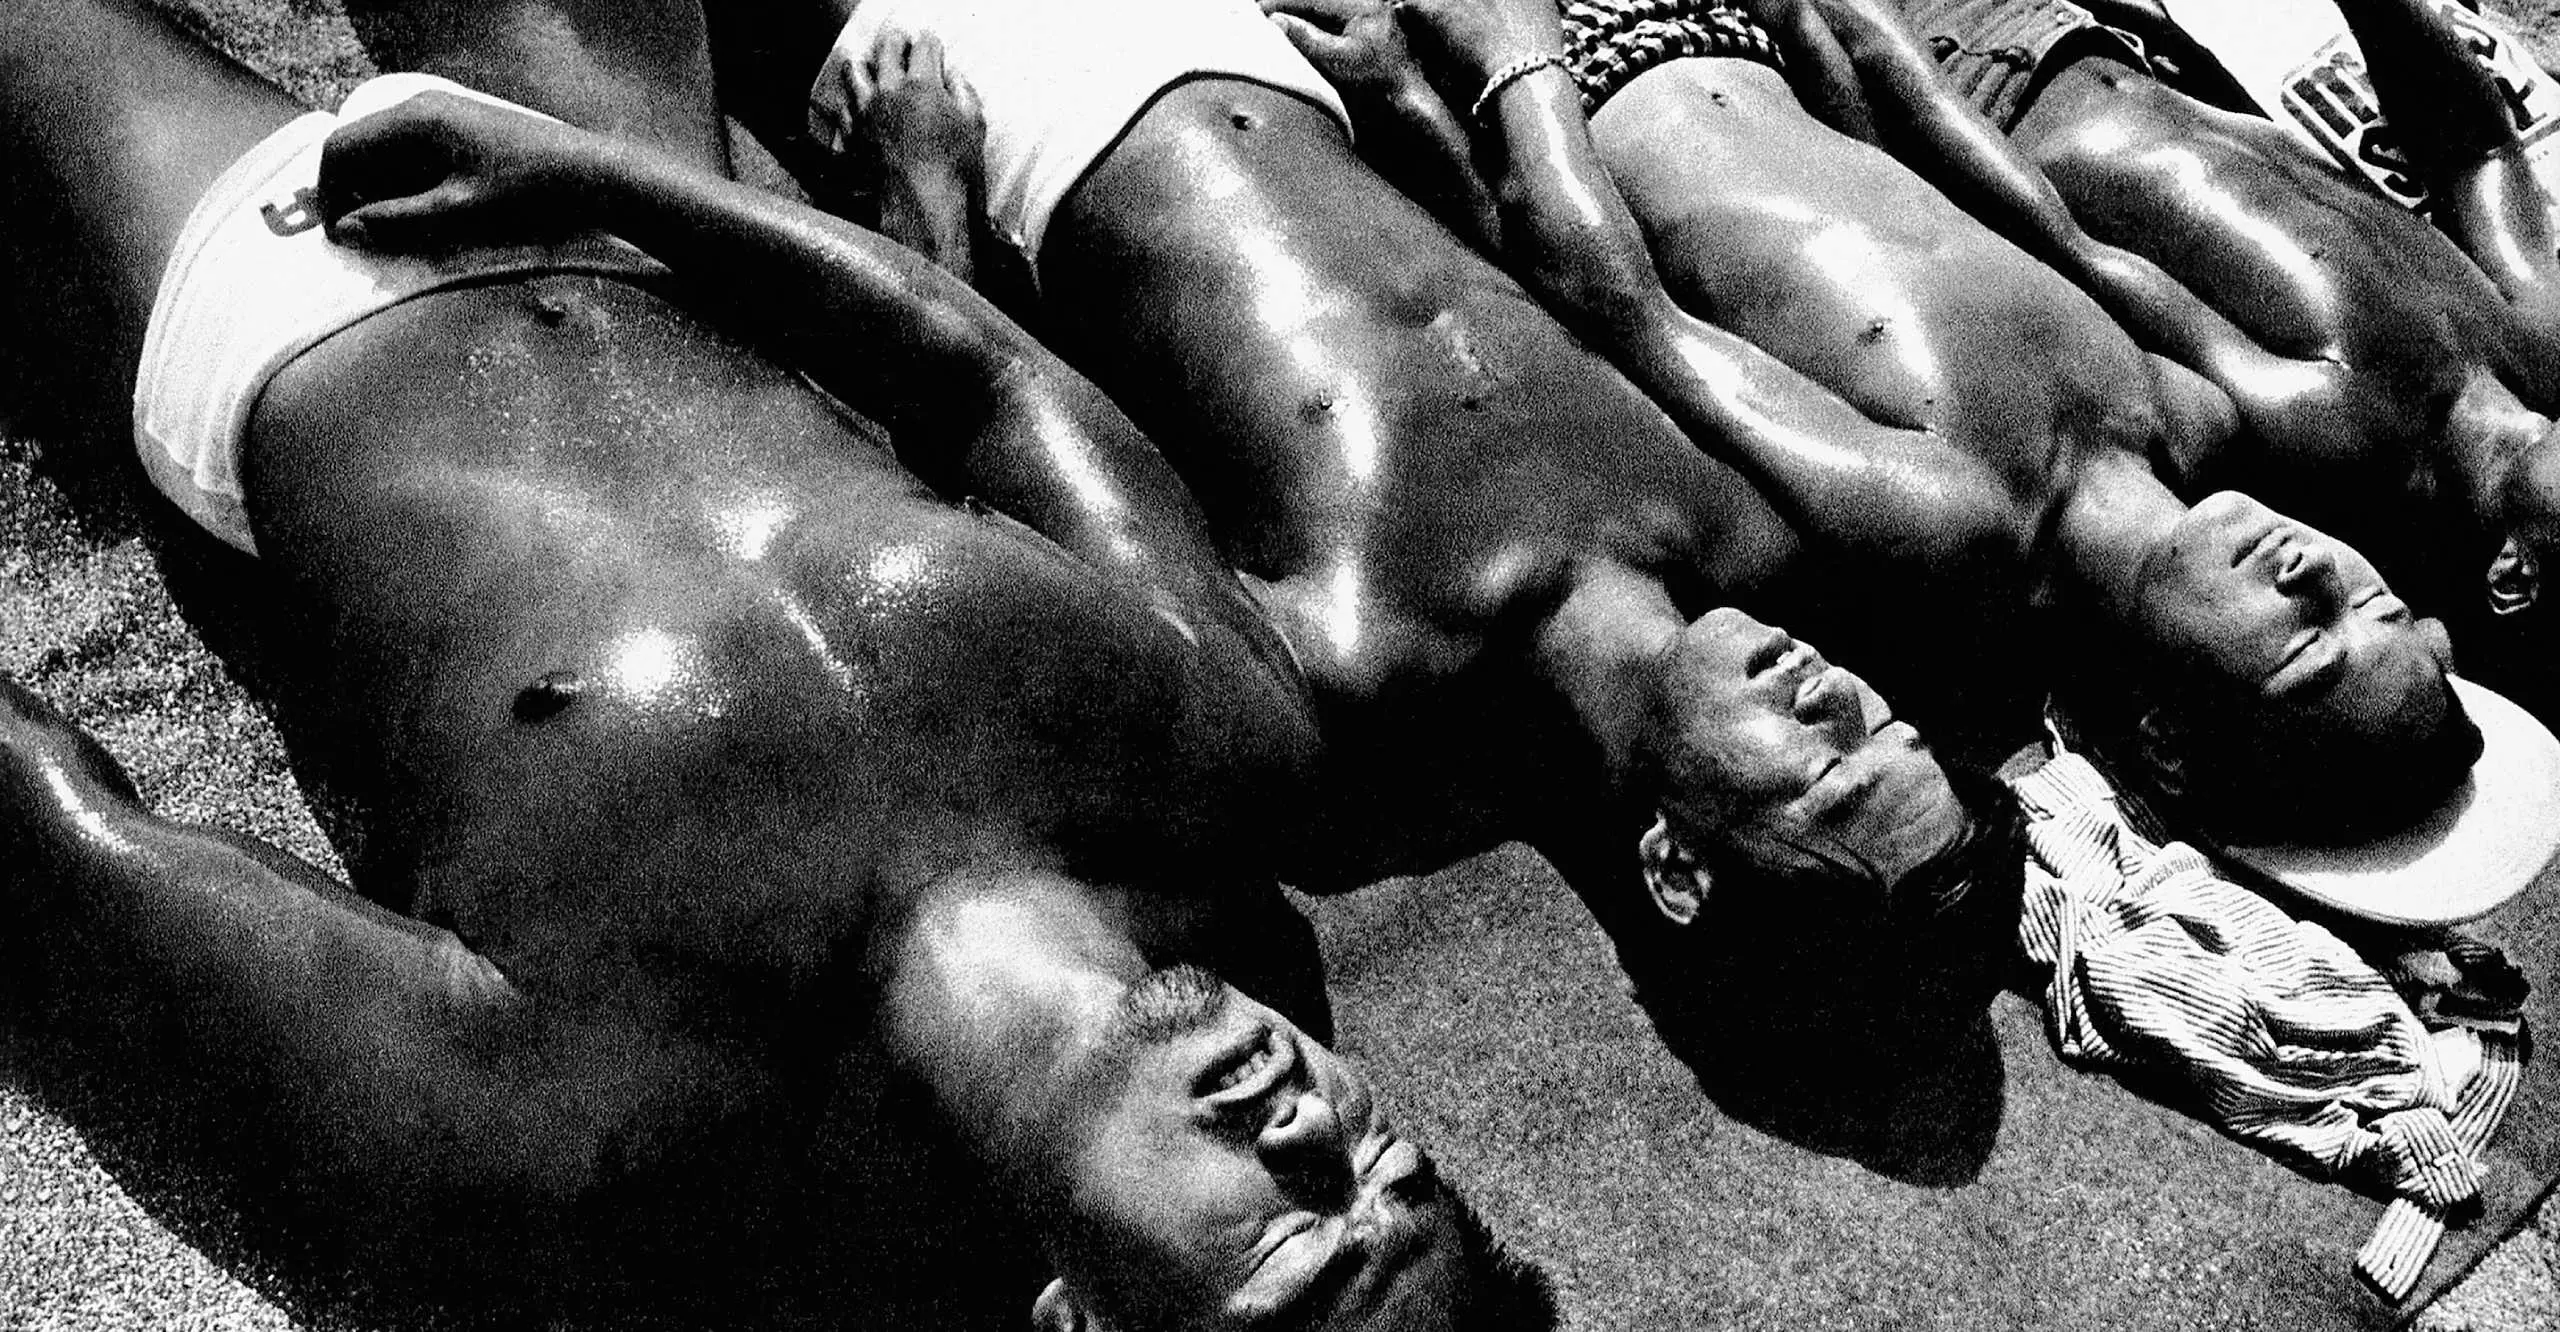 Black and white photograph of a group of men sunbathing, laying in a row next to each other wearing swimming trunks